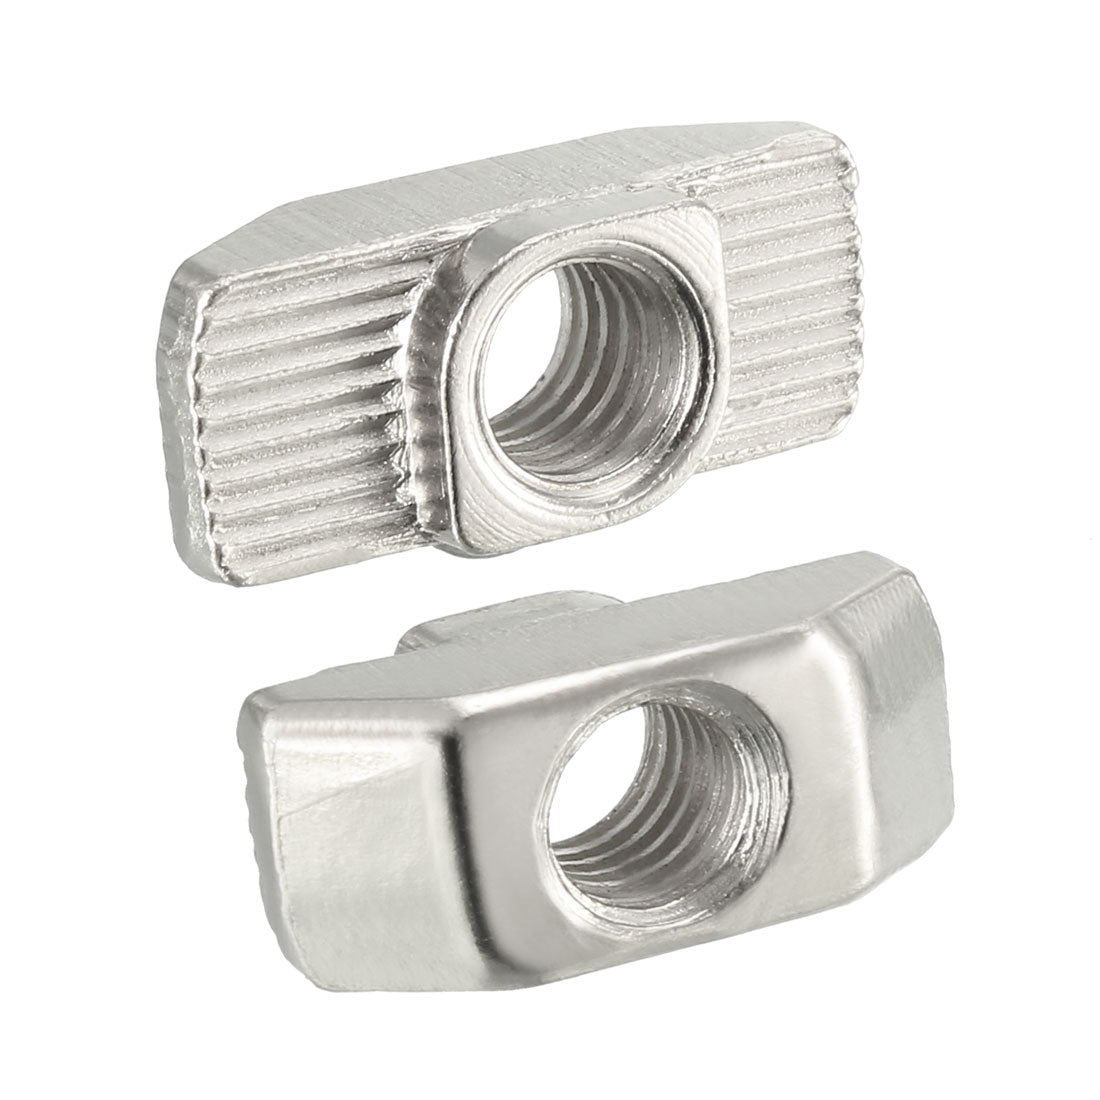 Uxcell Uxcell Sliding T Slot Nuts, M5 Thread for 2020 Series Aluminum Extrusion Profile 20pcs